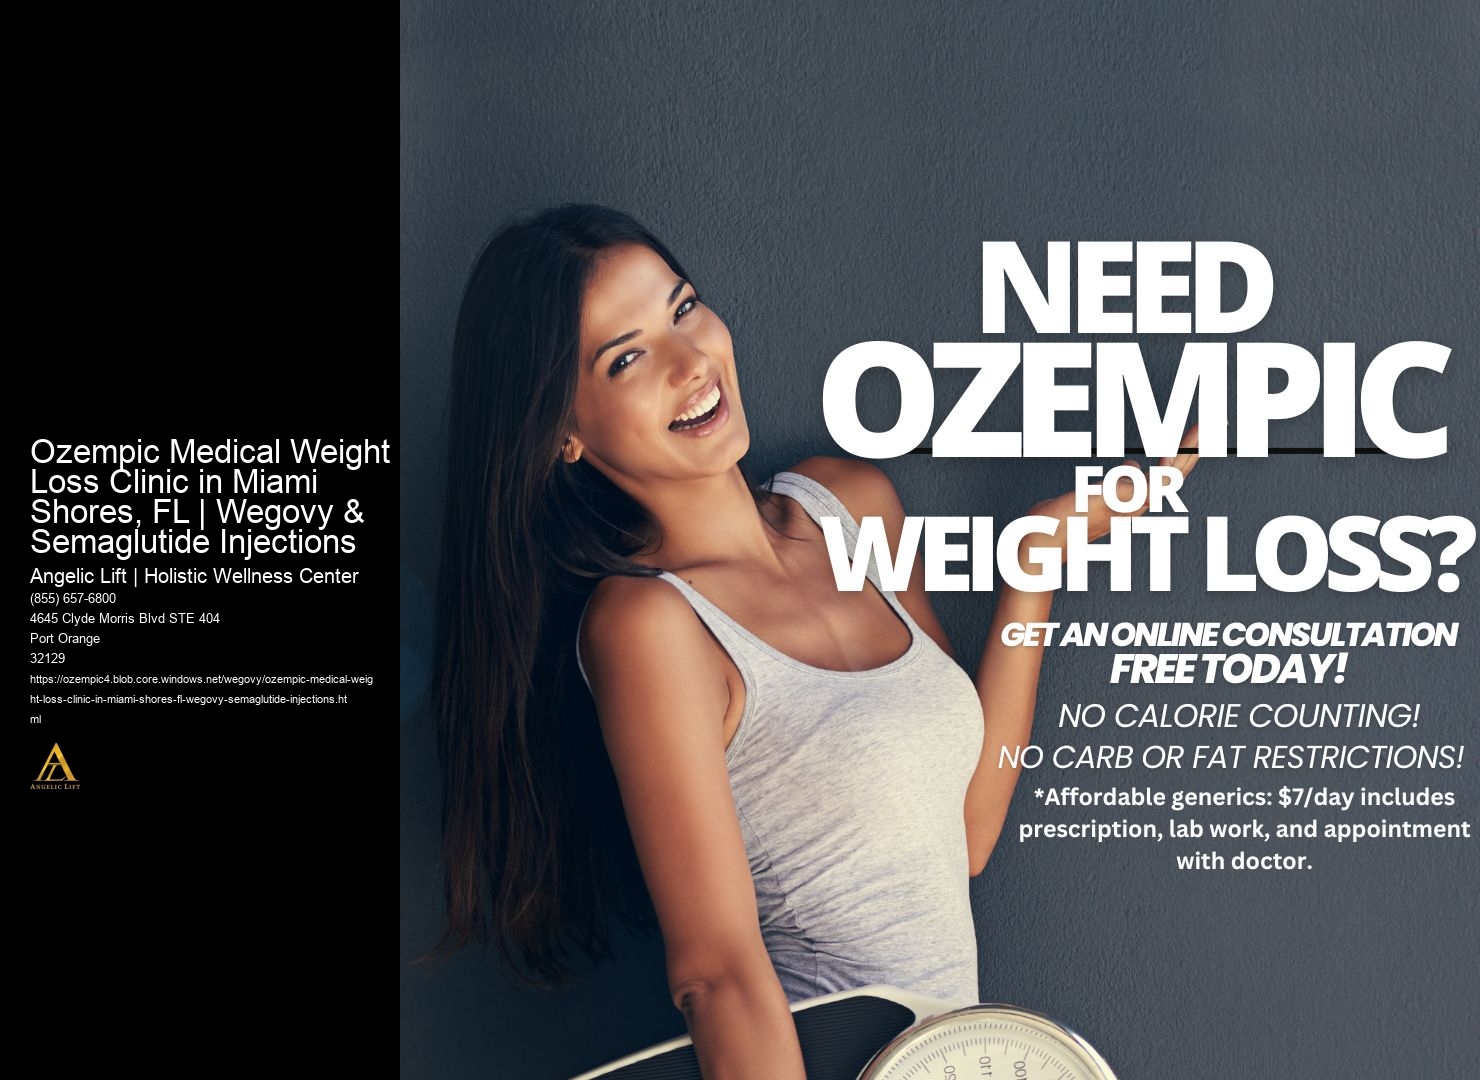 Ozempic Medical Weight Loss Clinic in Miami Shores, FL | Wegovy & Semaglutide Injections